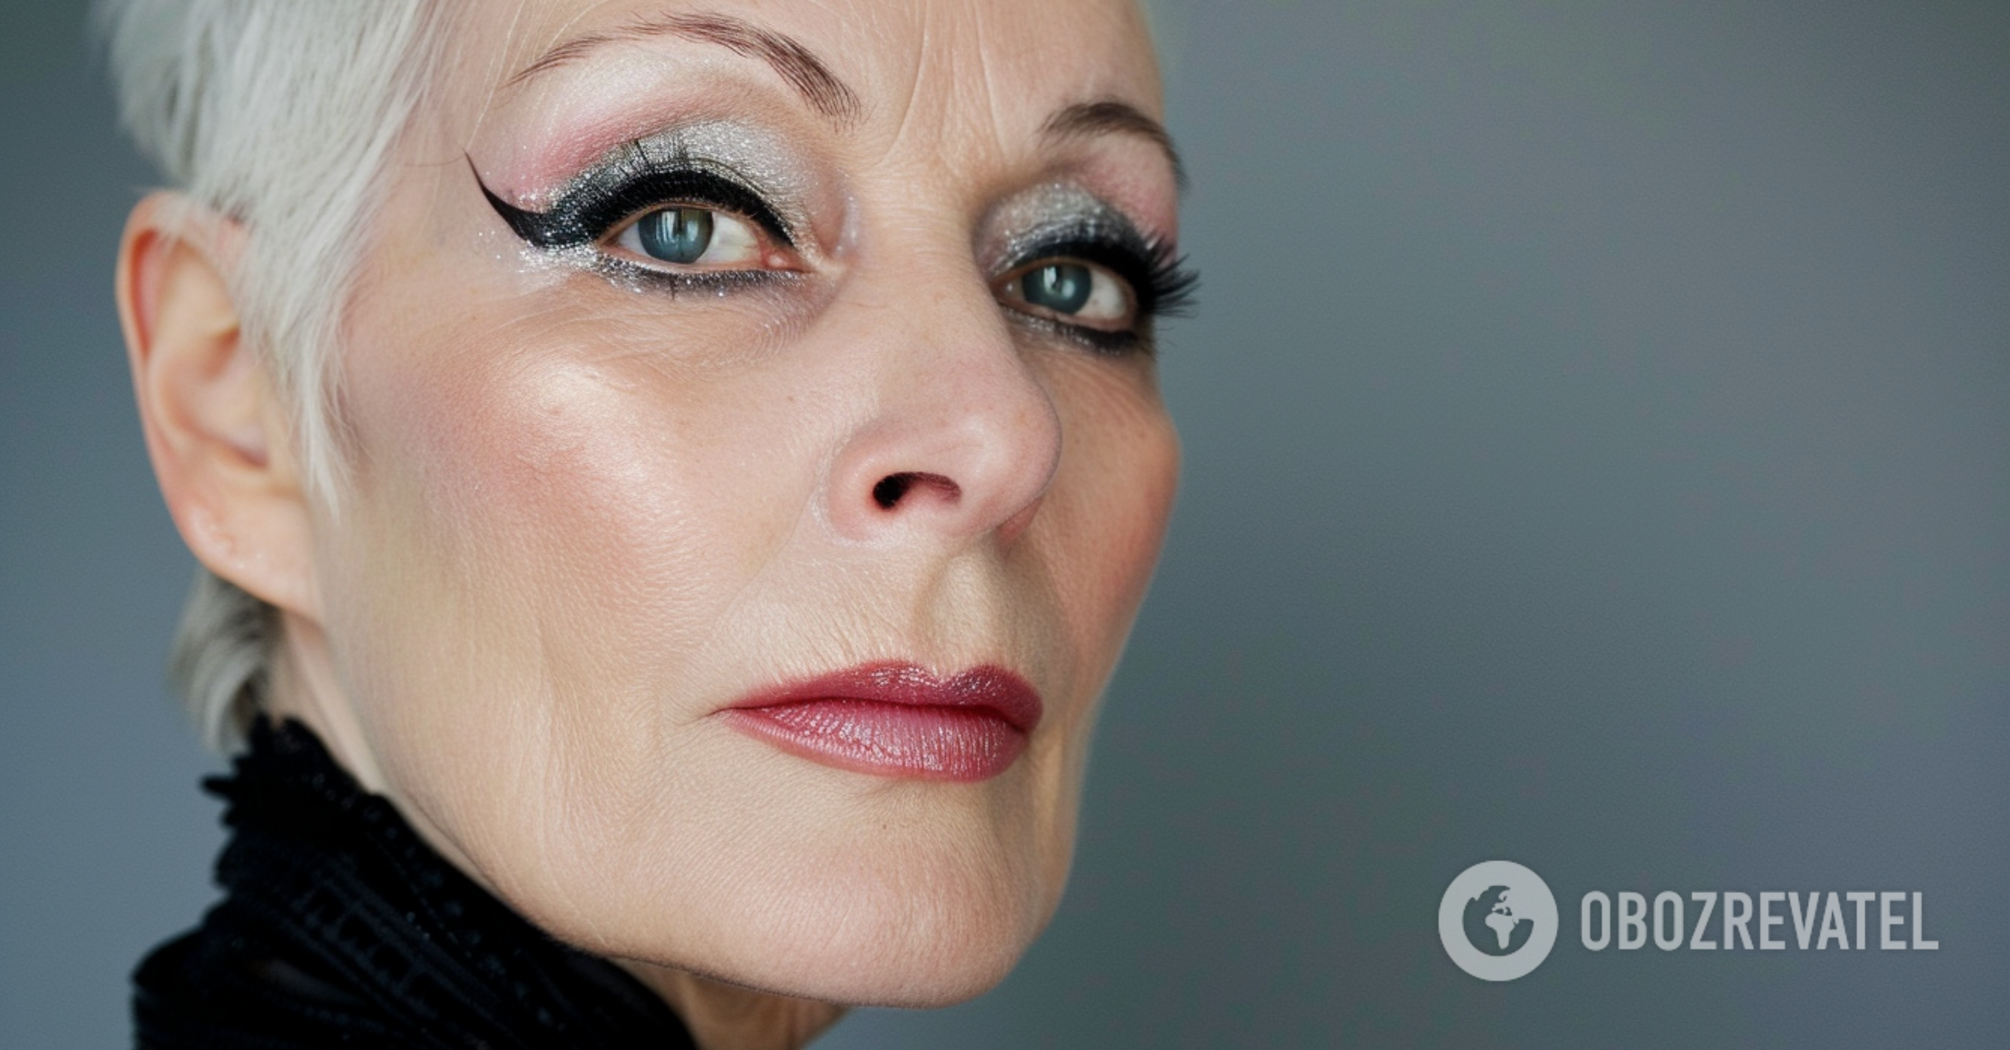 Making you look older: summer makeup mistakes to avoid